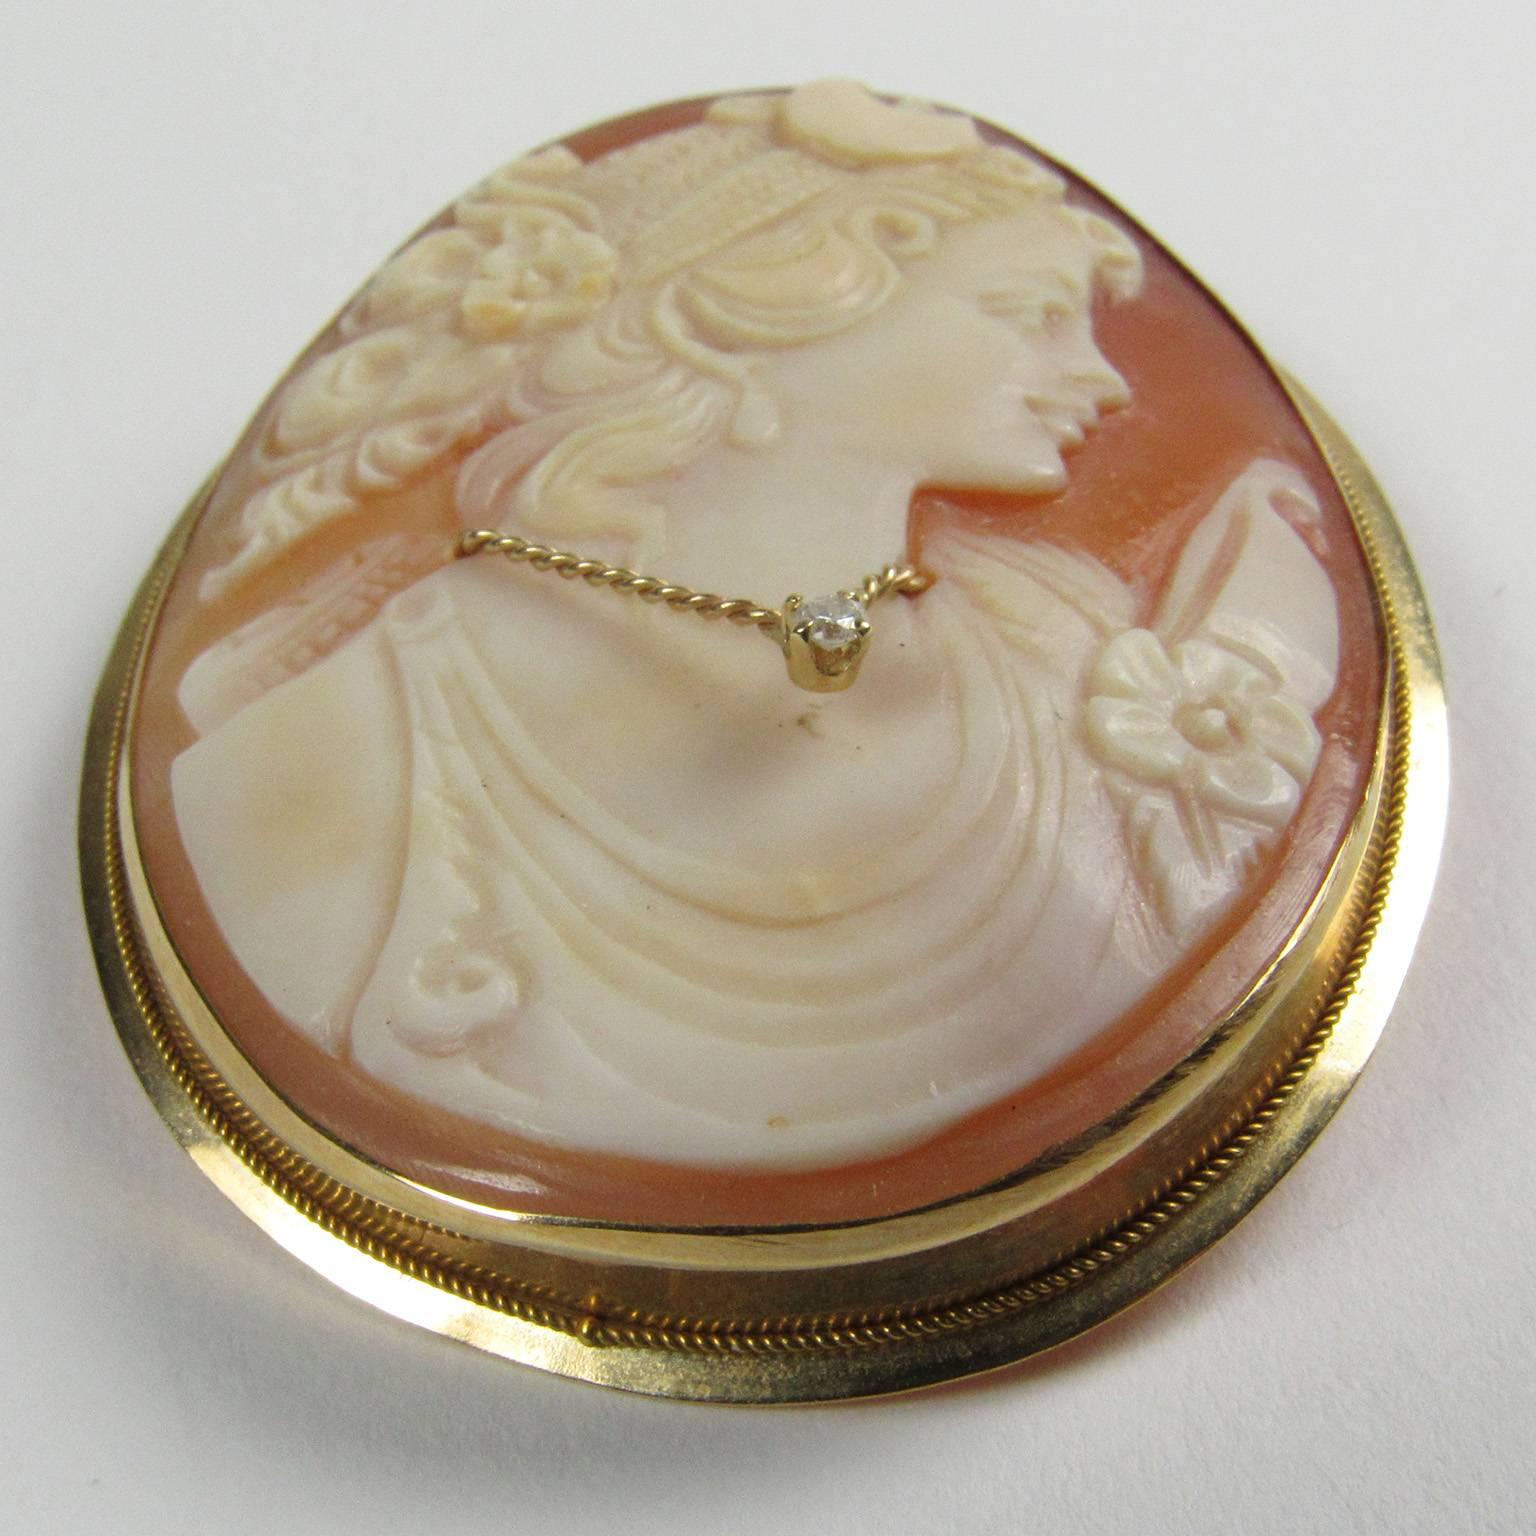 Victorian Hand Carved Shell and Diamond Convertable Cameo Brooch depicting a young woman in profile with a small diamond pendant.  Mounted in a 14kt yellow gold setting, signature on verso is illegible.  Can be worn as a pin or a pendant.  1 7/8 x 1